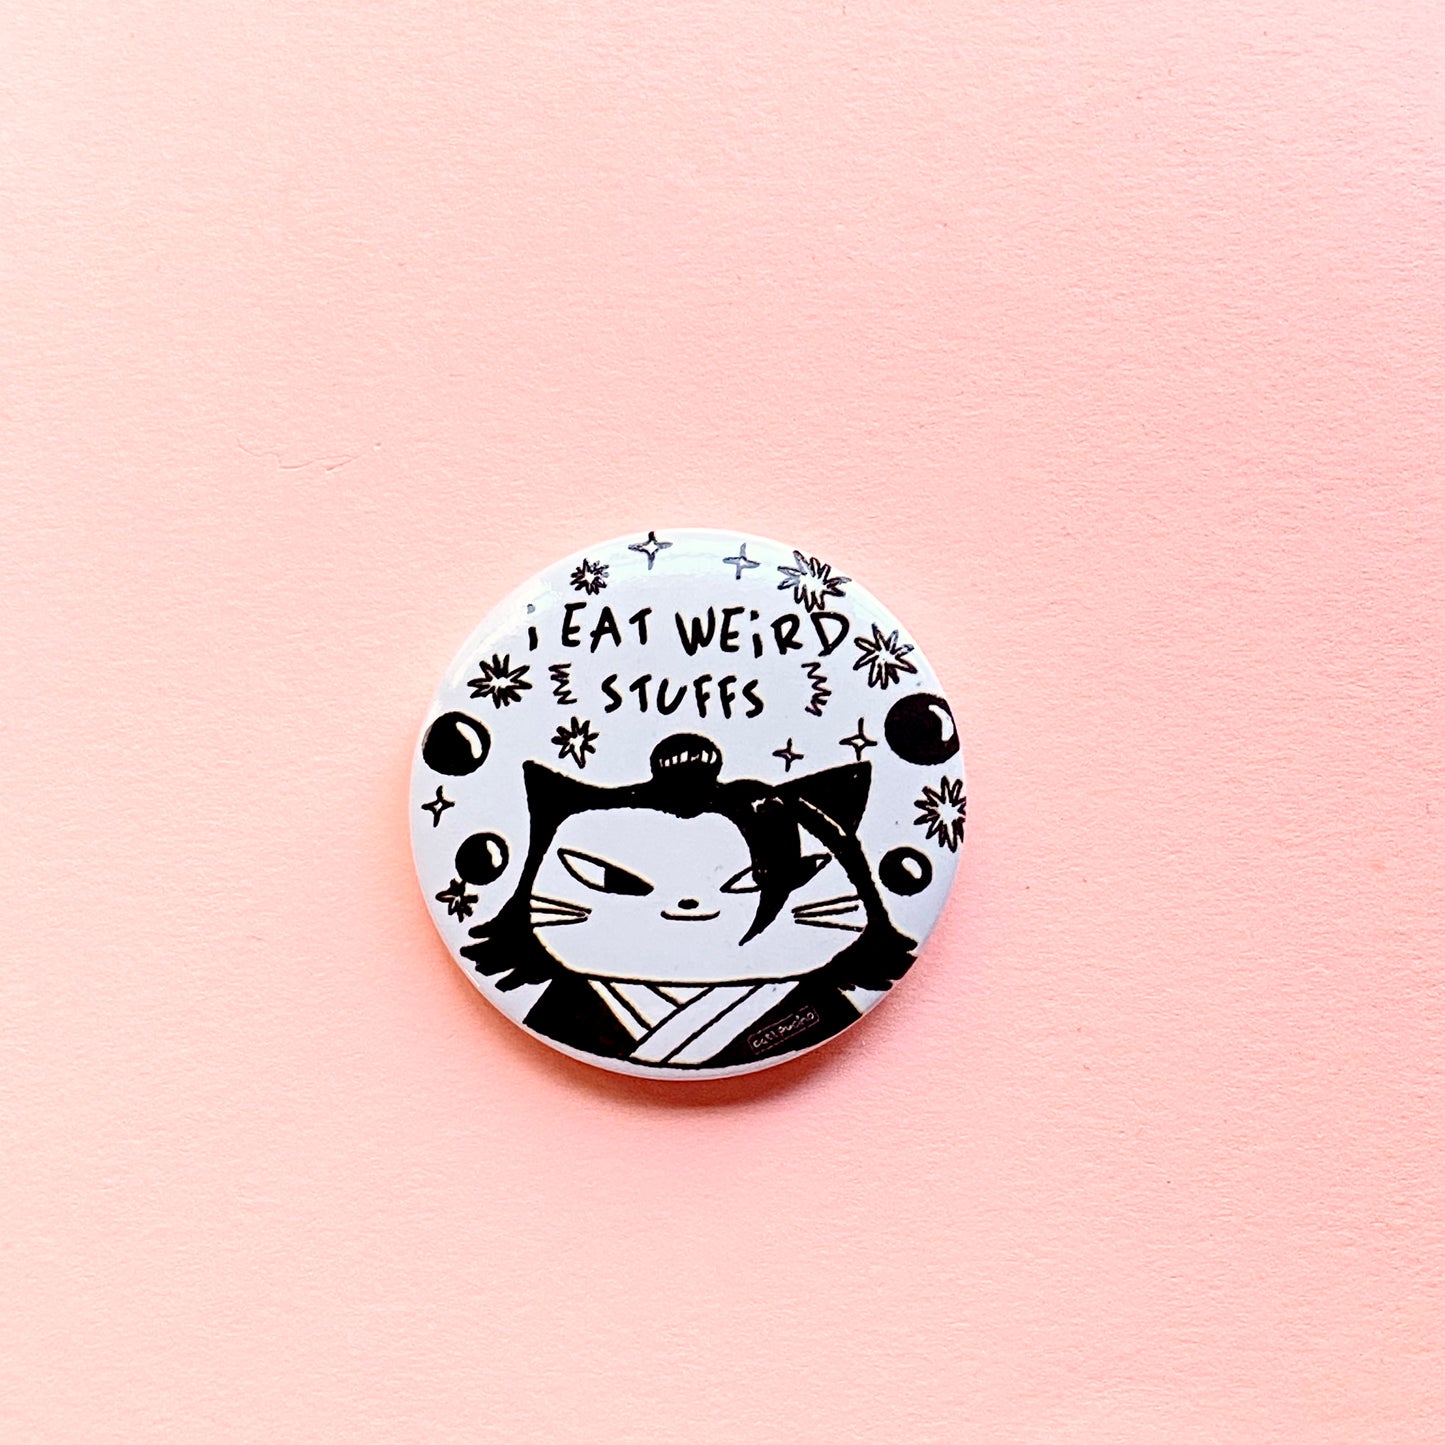 sorcerer kitty rounded button pins